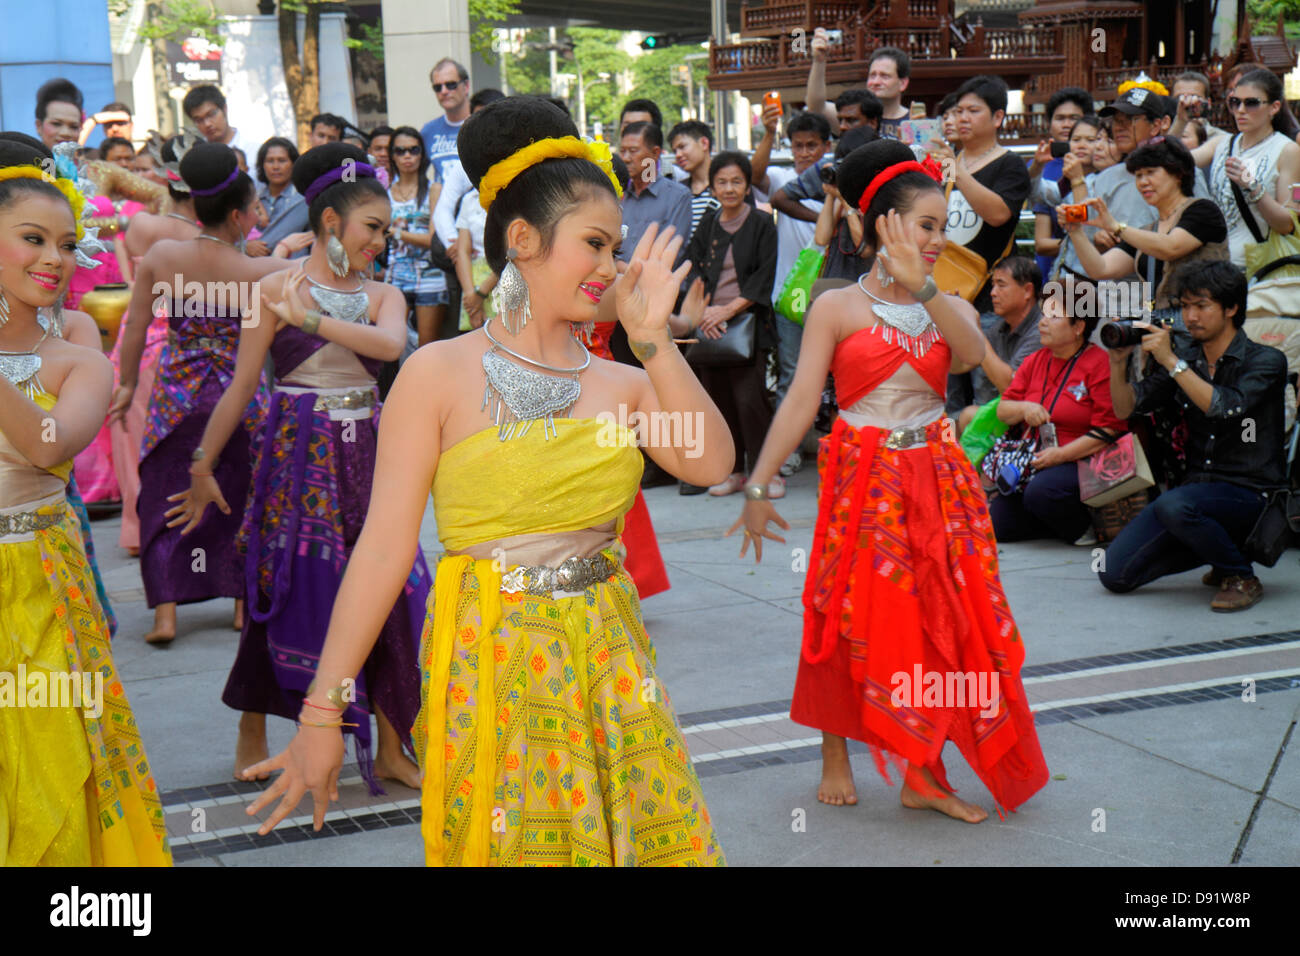 Thailand,Thai,Bangkok,Pathum Wan,Phaya Thai Road,MBK Center,centre,complex,show,performance,performers,performing,student students,dance troupe,dancer Stock Photo